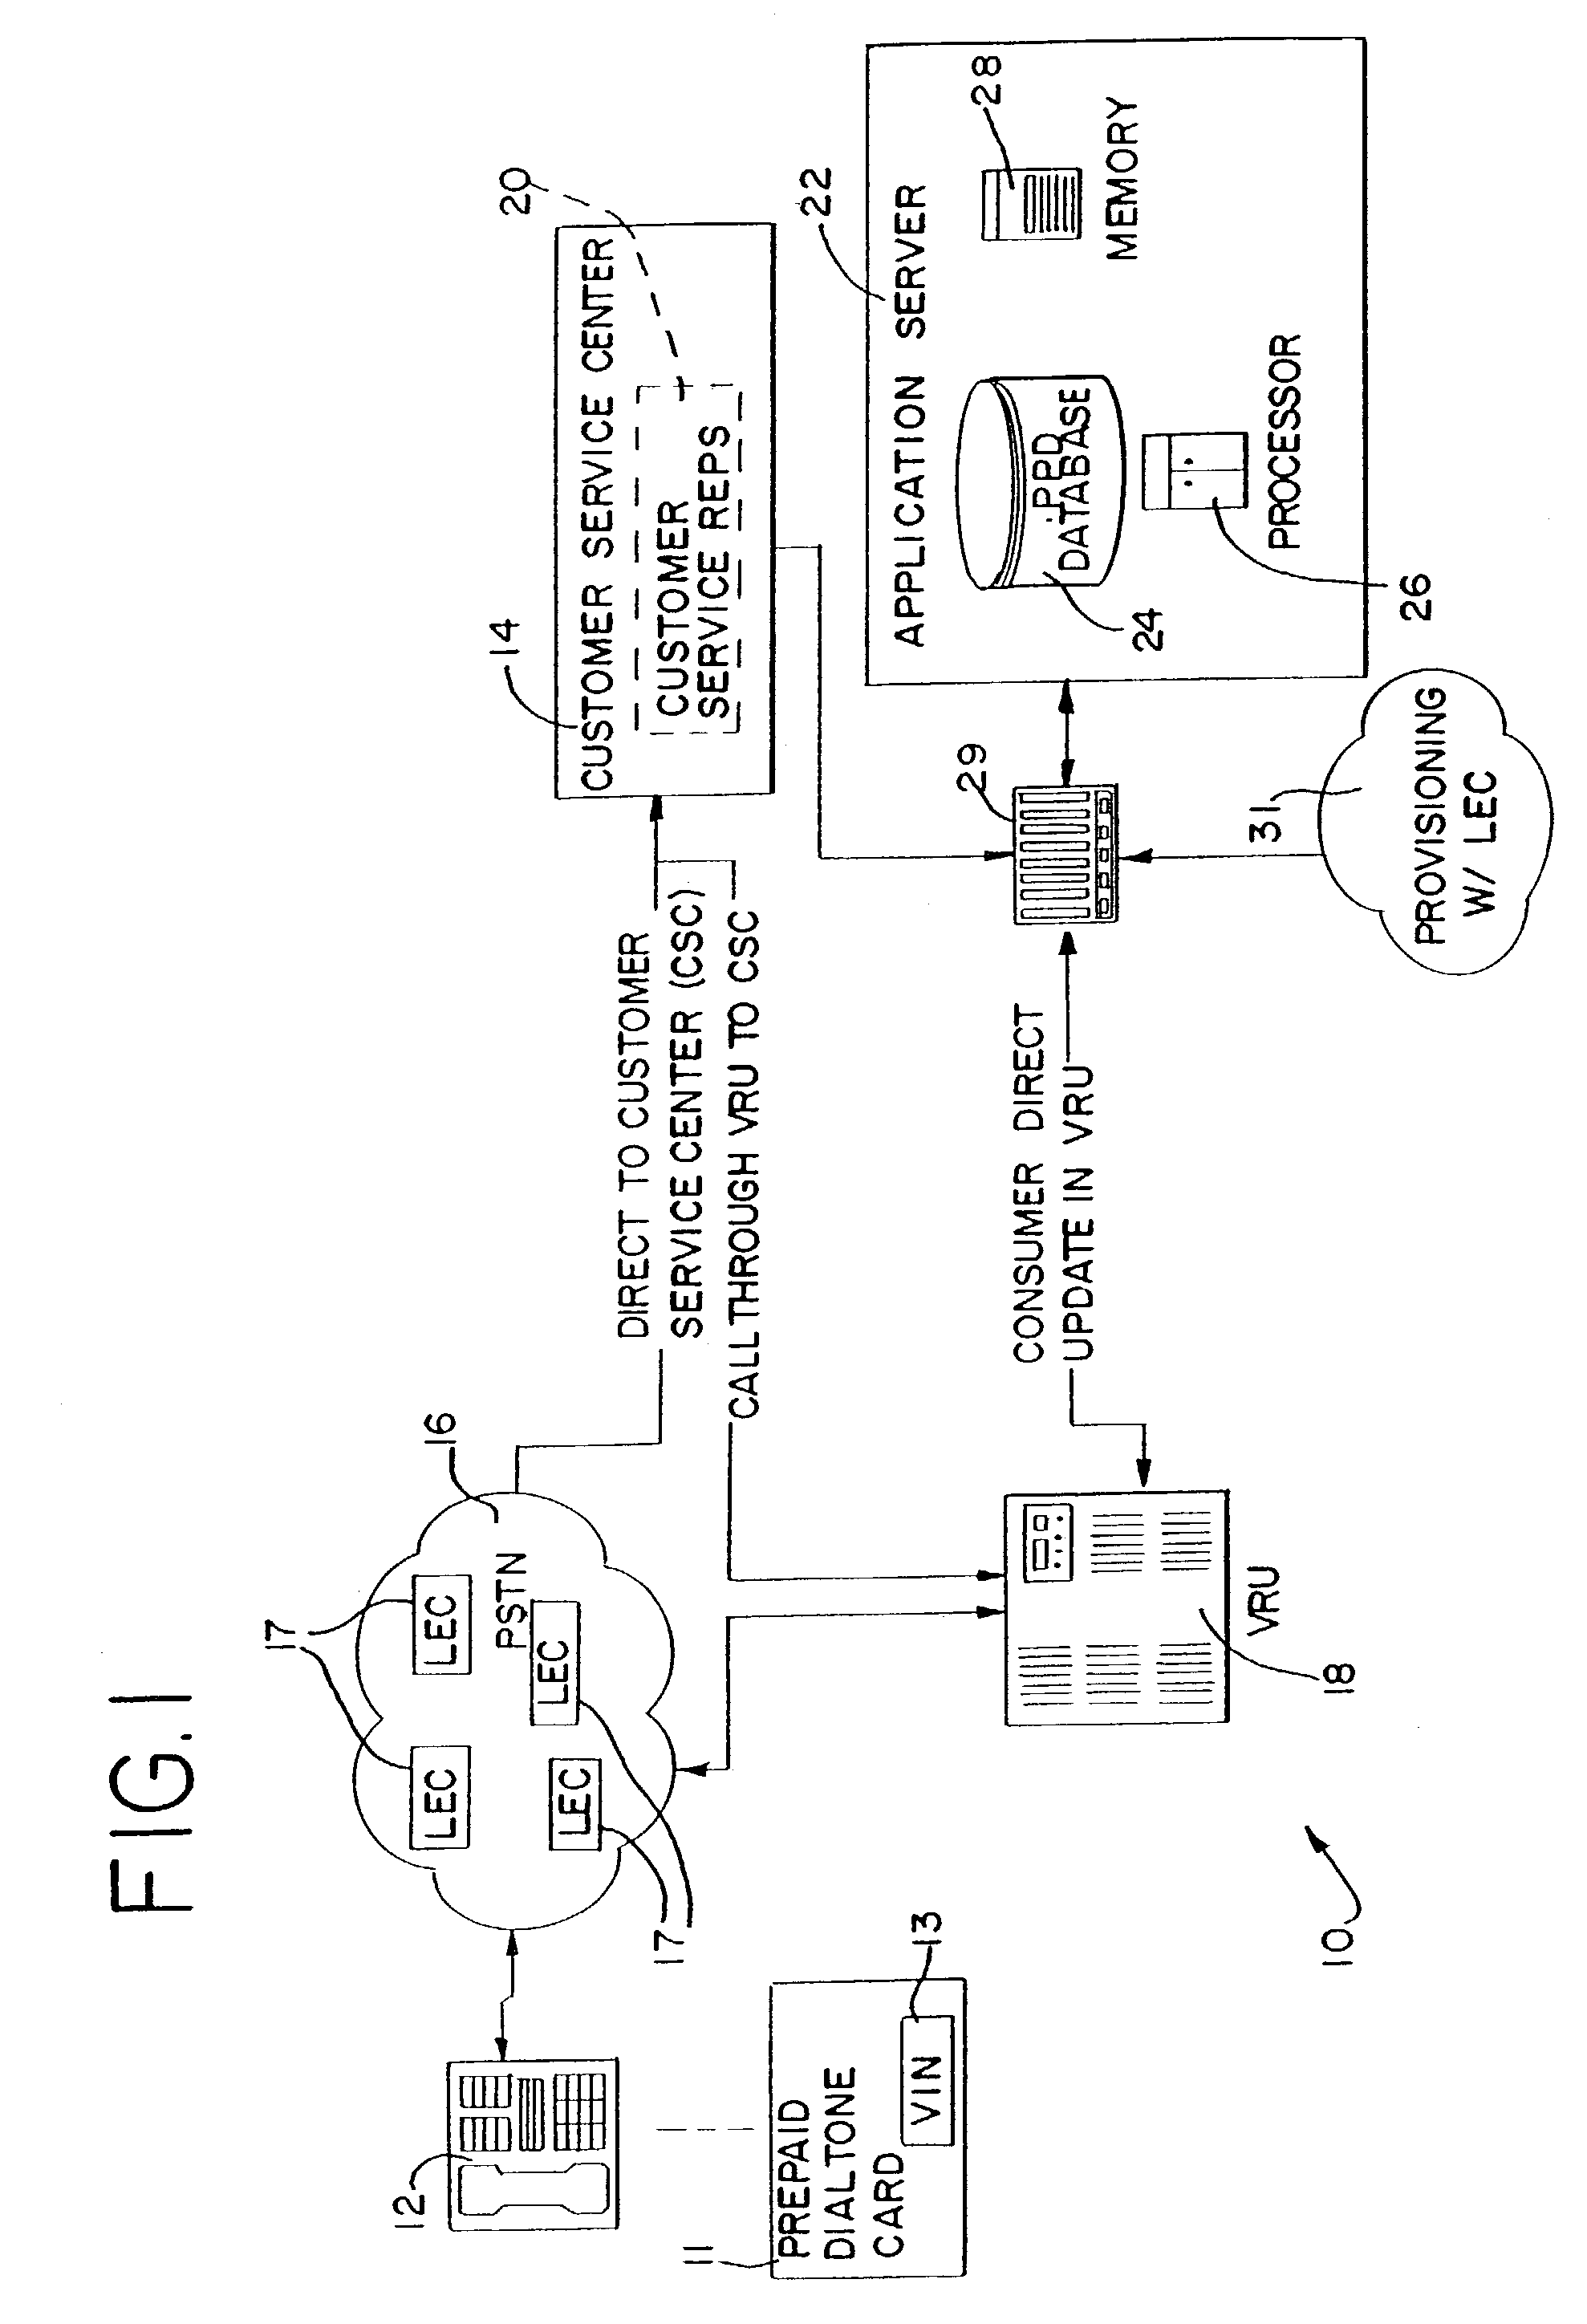 Method and apparatus for providing prepaid local telephone services